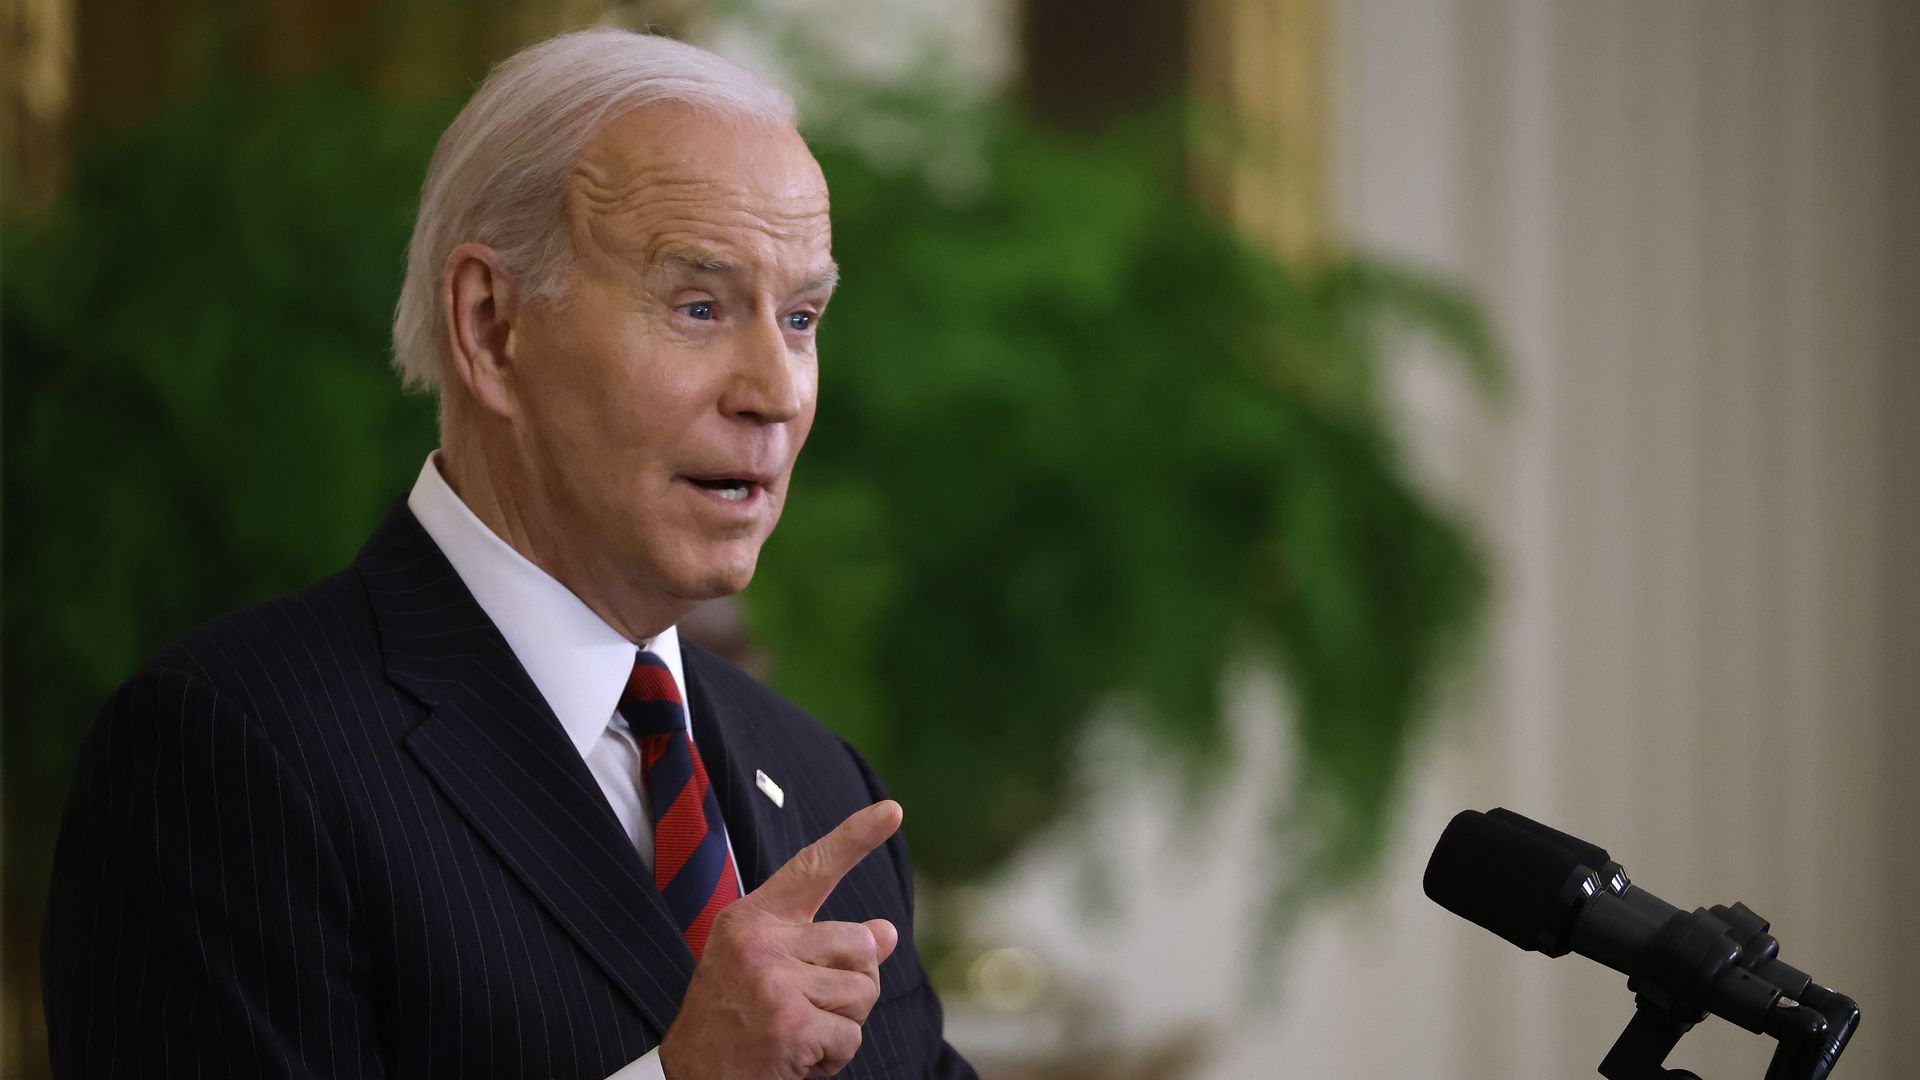 Picture of Biden speaking behind a microphone